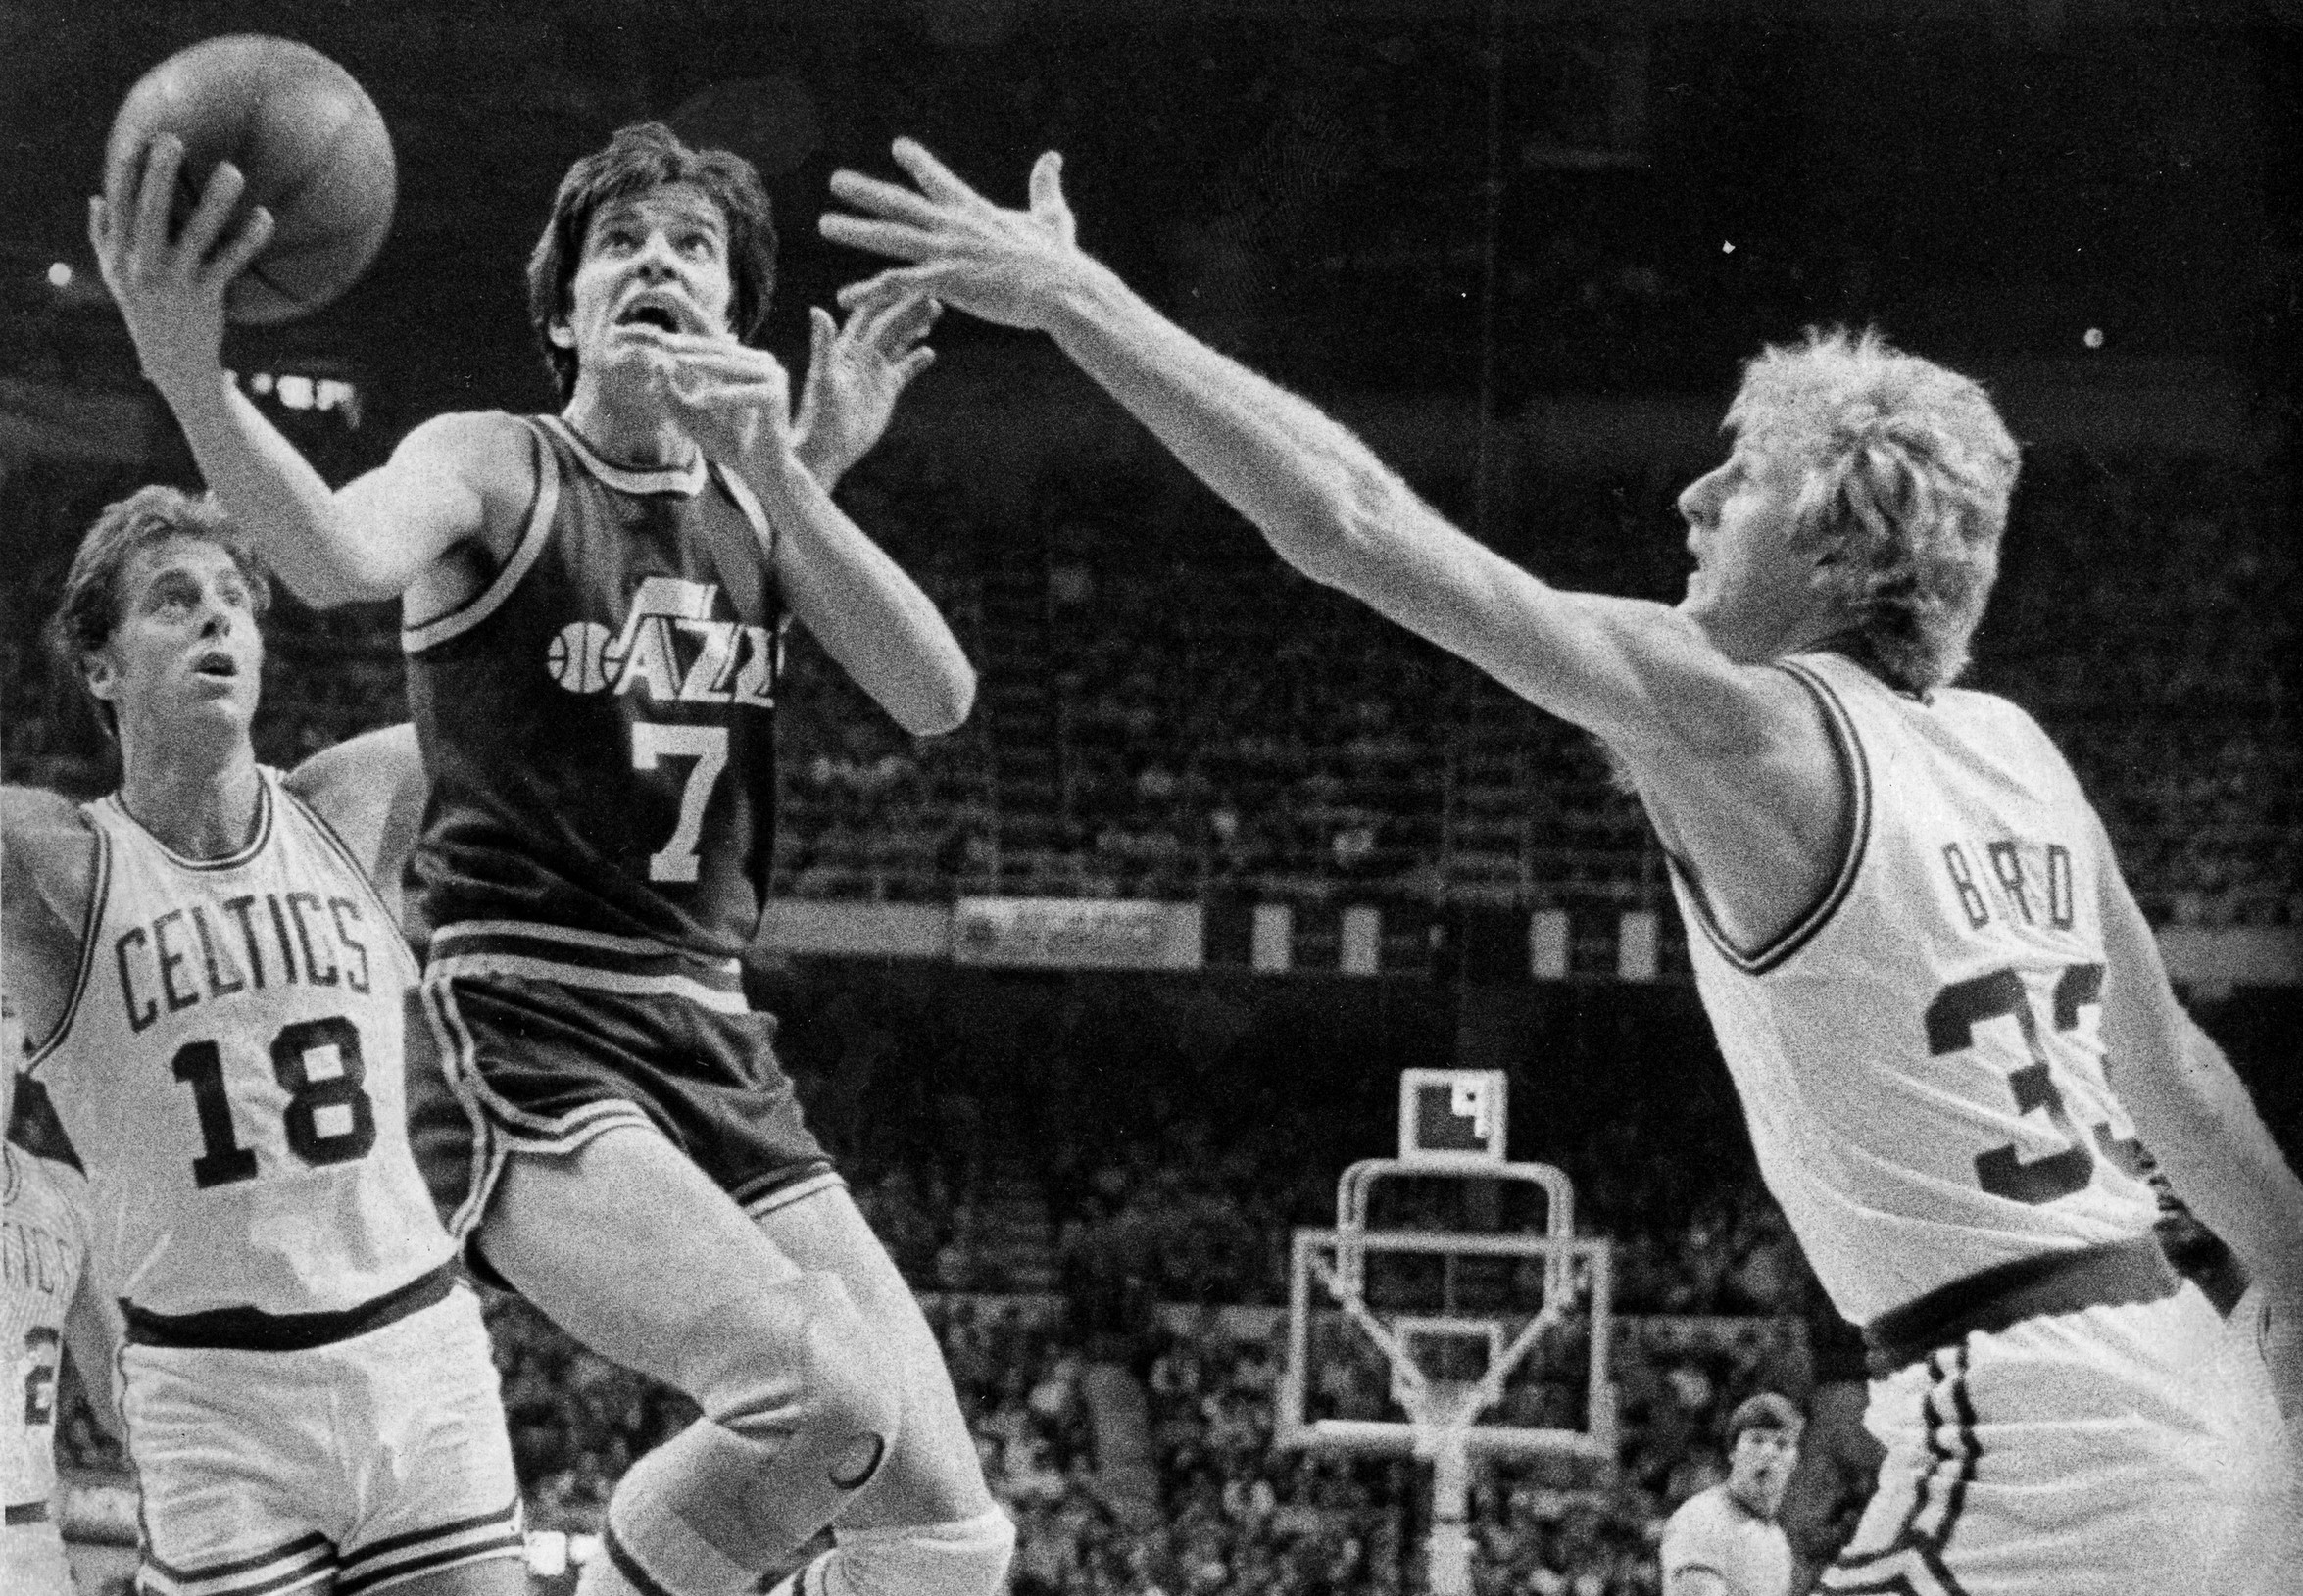 Utah Jazz guard Pete Maravich, center, shoots as Boston Celtics defenders Larry Bird, right, and Dave Cowens, left, attempt to block him.